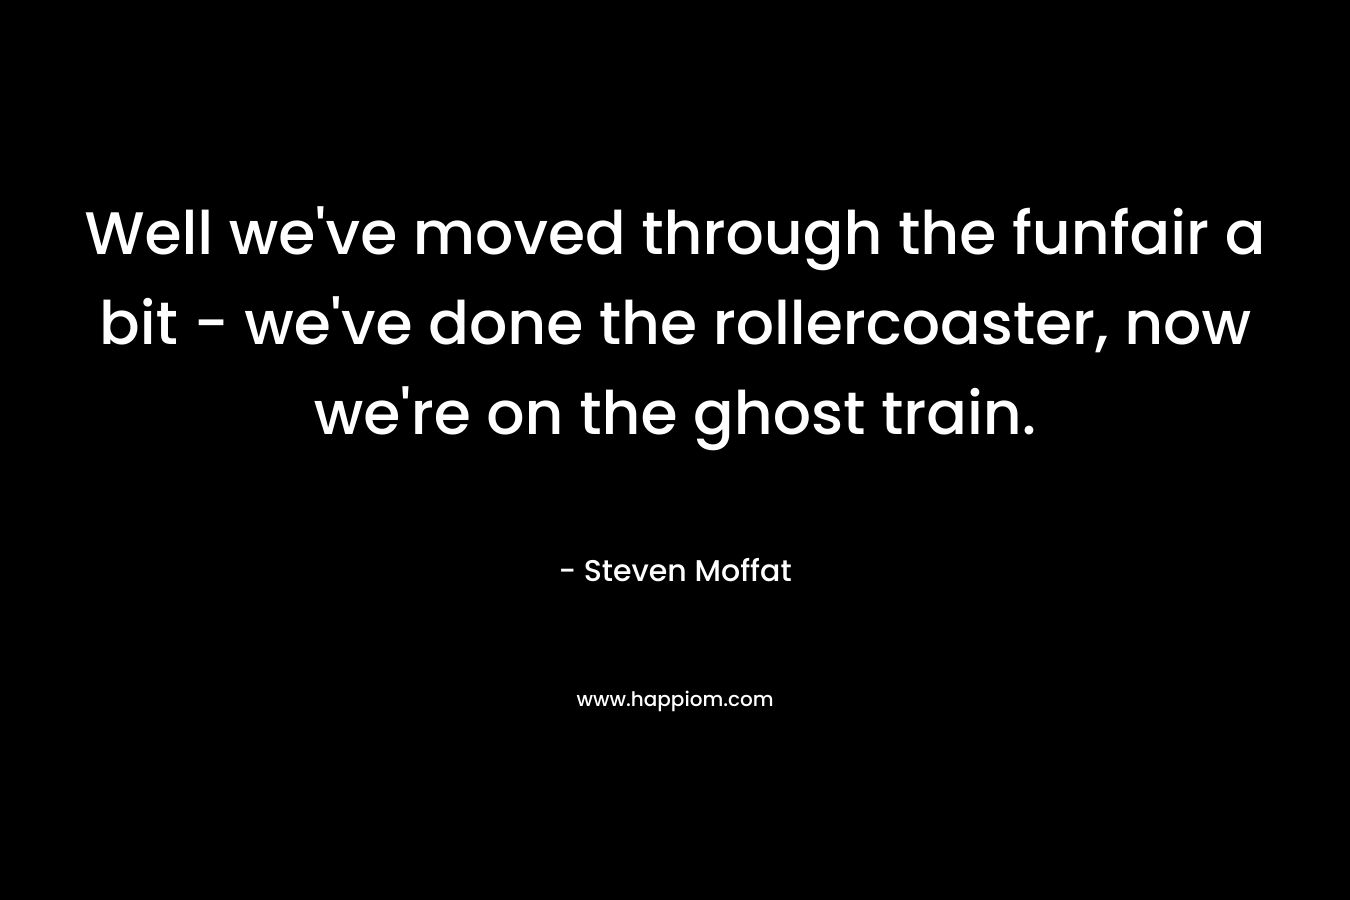 Well we've moved through the funfair a bit - we've done the rollercoaster, now we're on the ghost train.